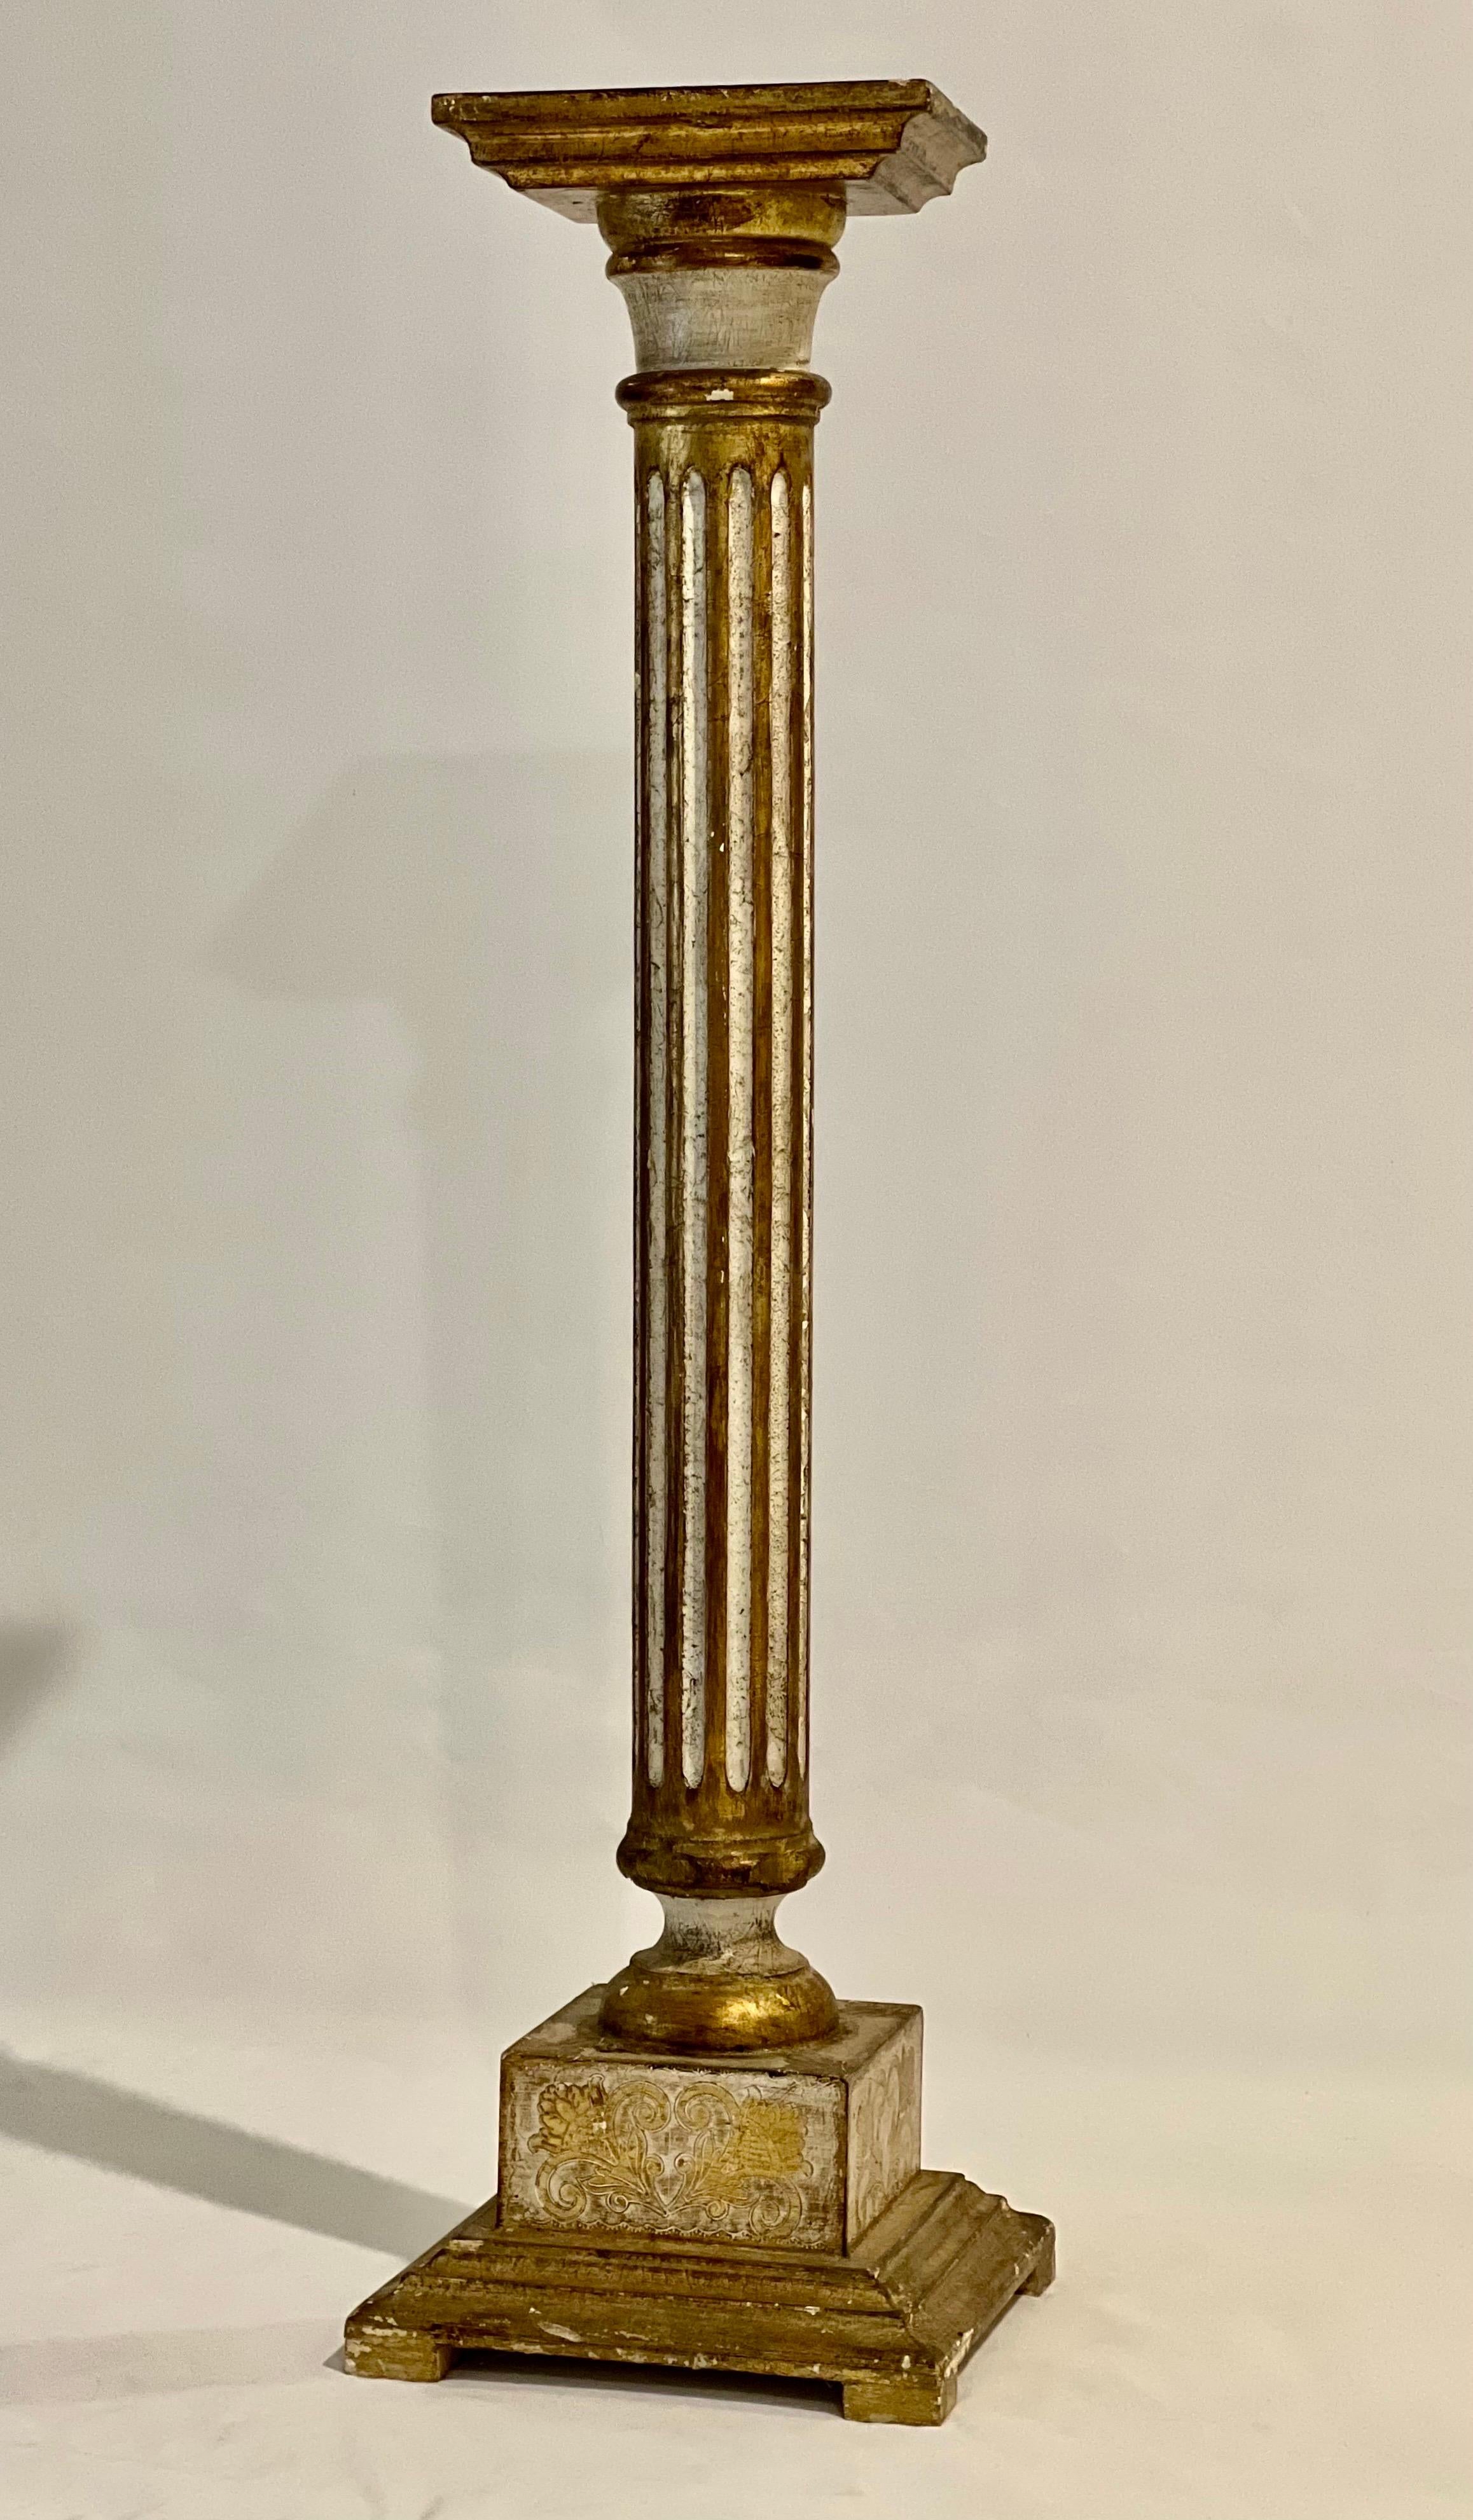 Italian Florentine Neoclassical Fluted Cream and Gold Gilt Painted Column Pedestal For Sale